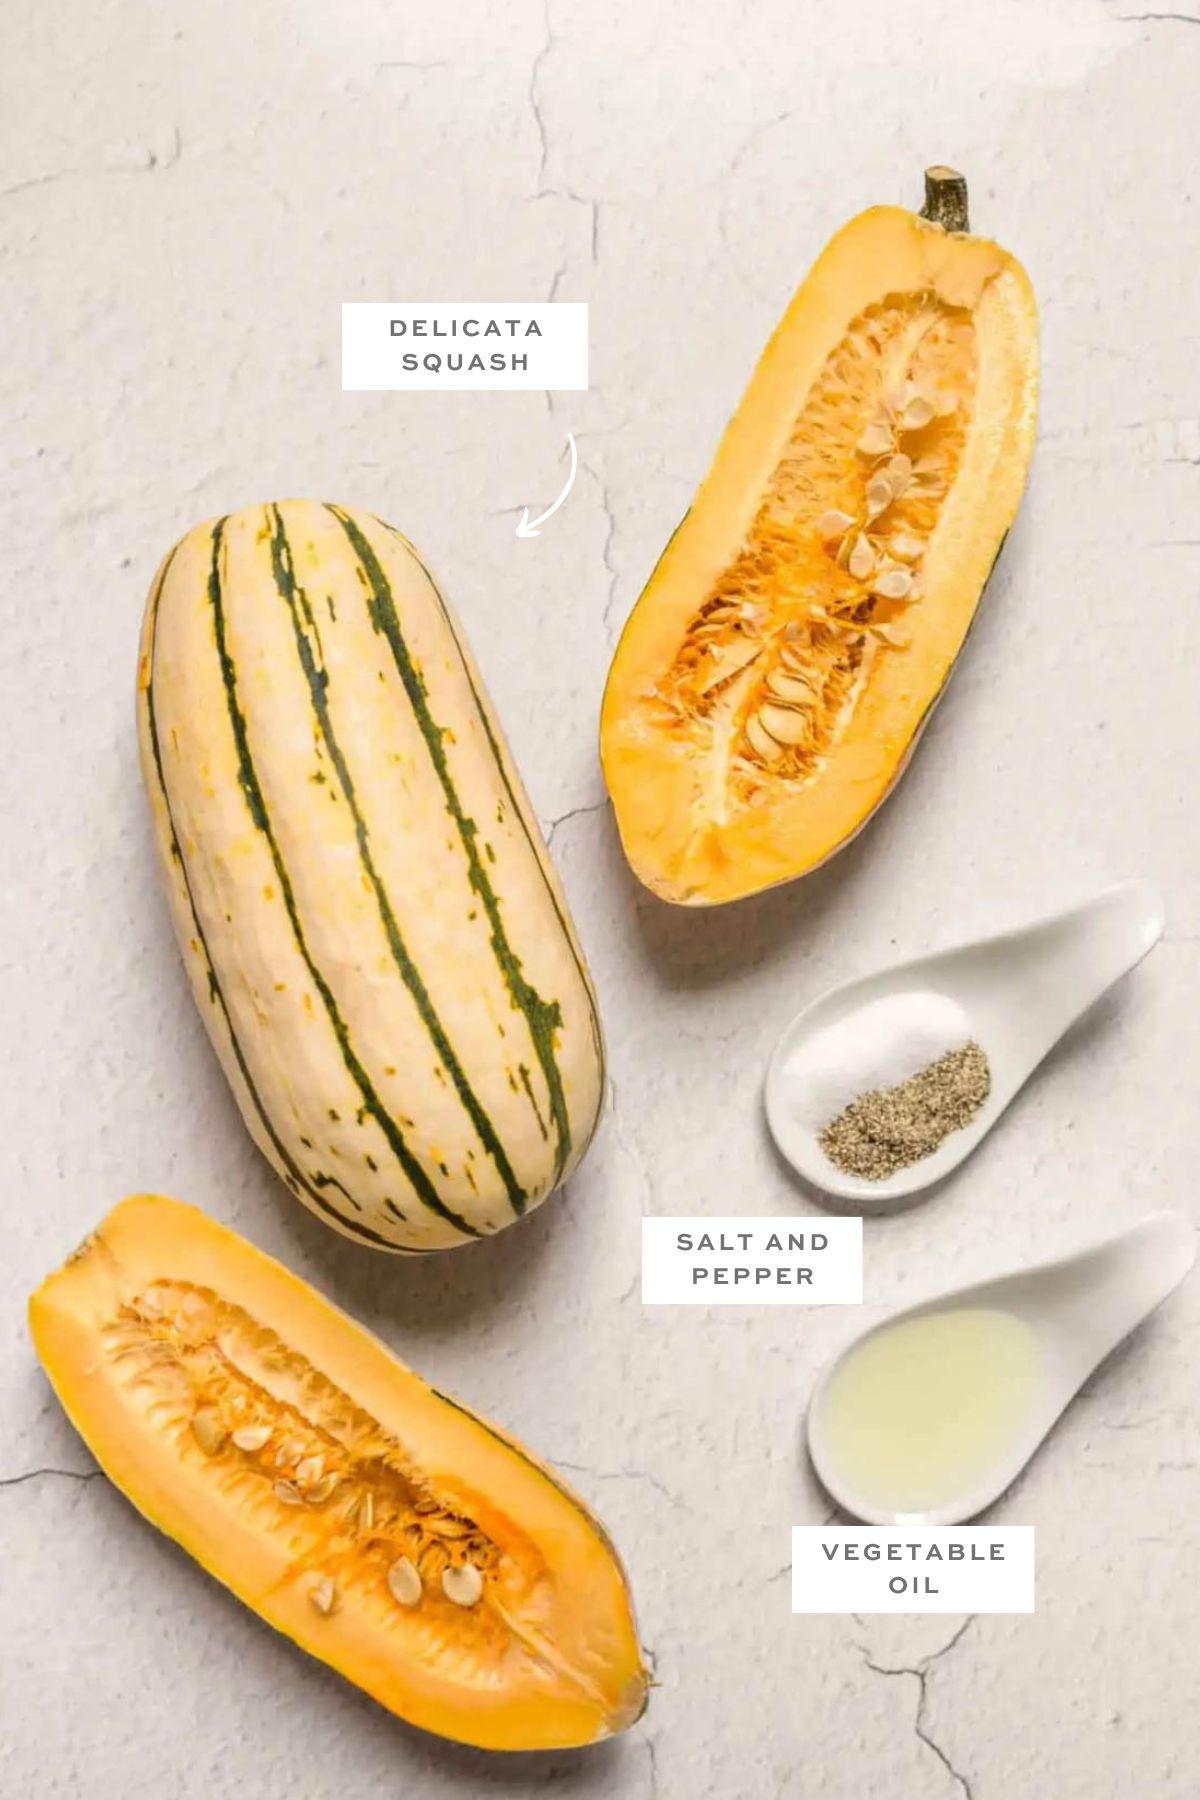 Key ingredients for roasted delicata squash with labels.